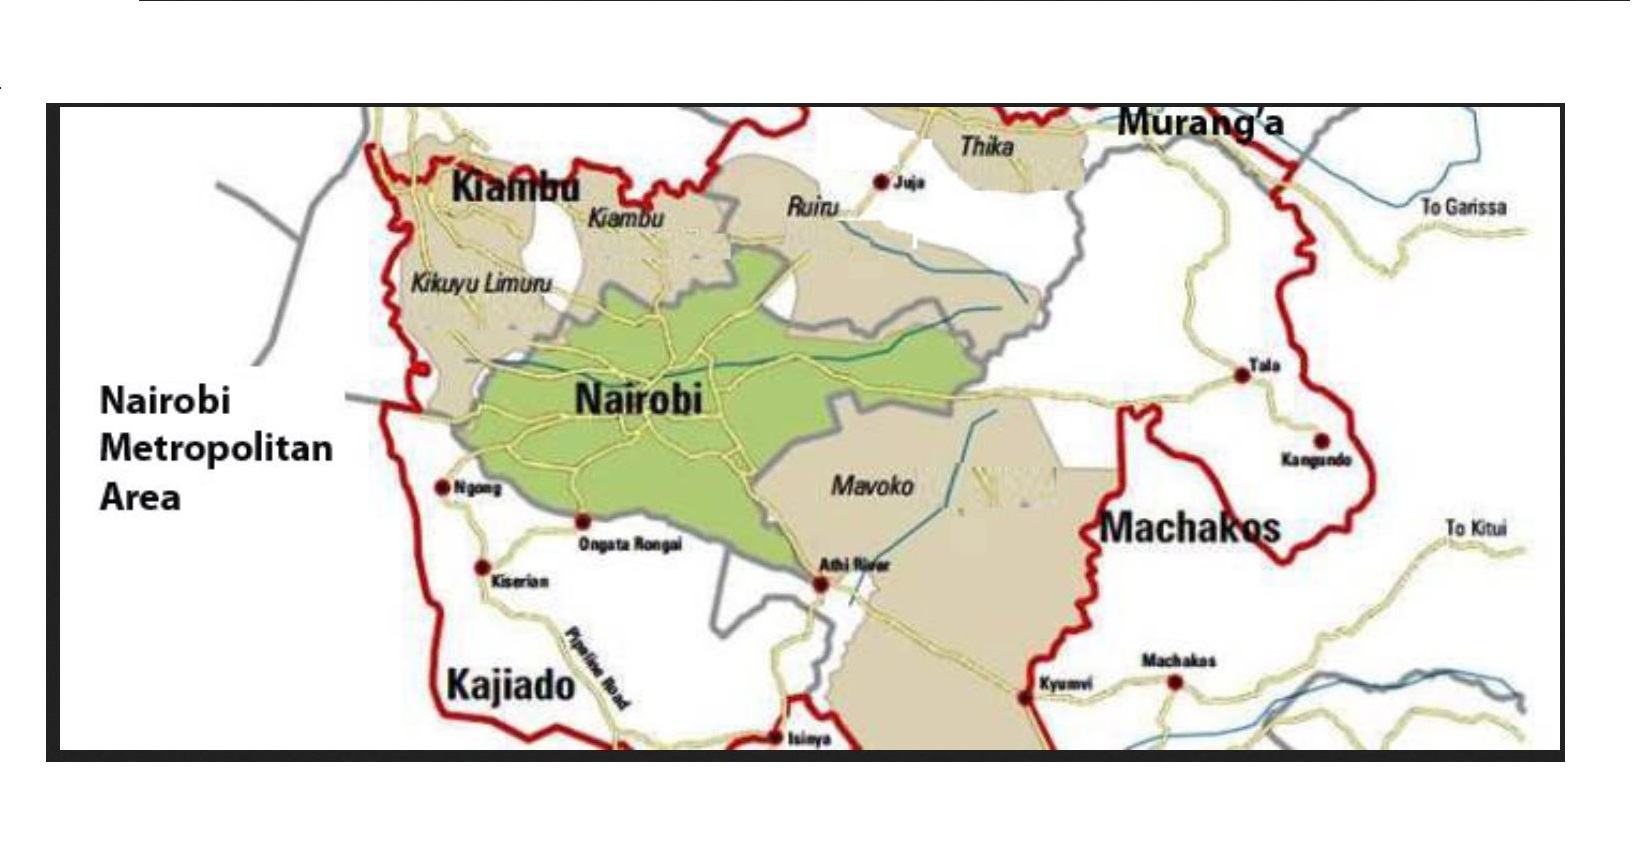 Nairobi Metropolitan Area, List of Counties, Regions, Towns that fall that territory are inside the red mark